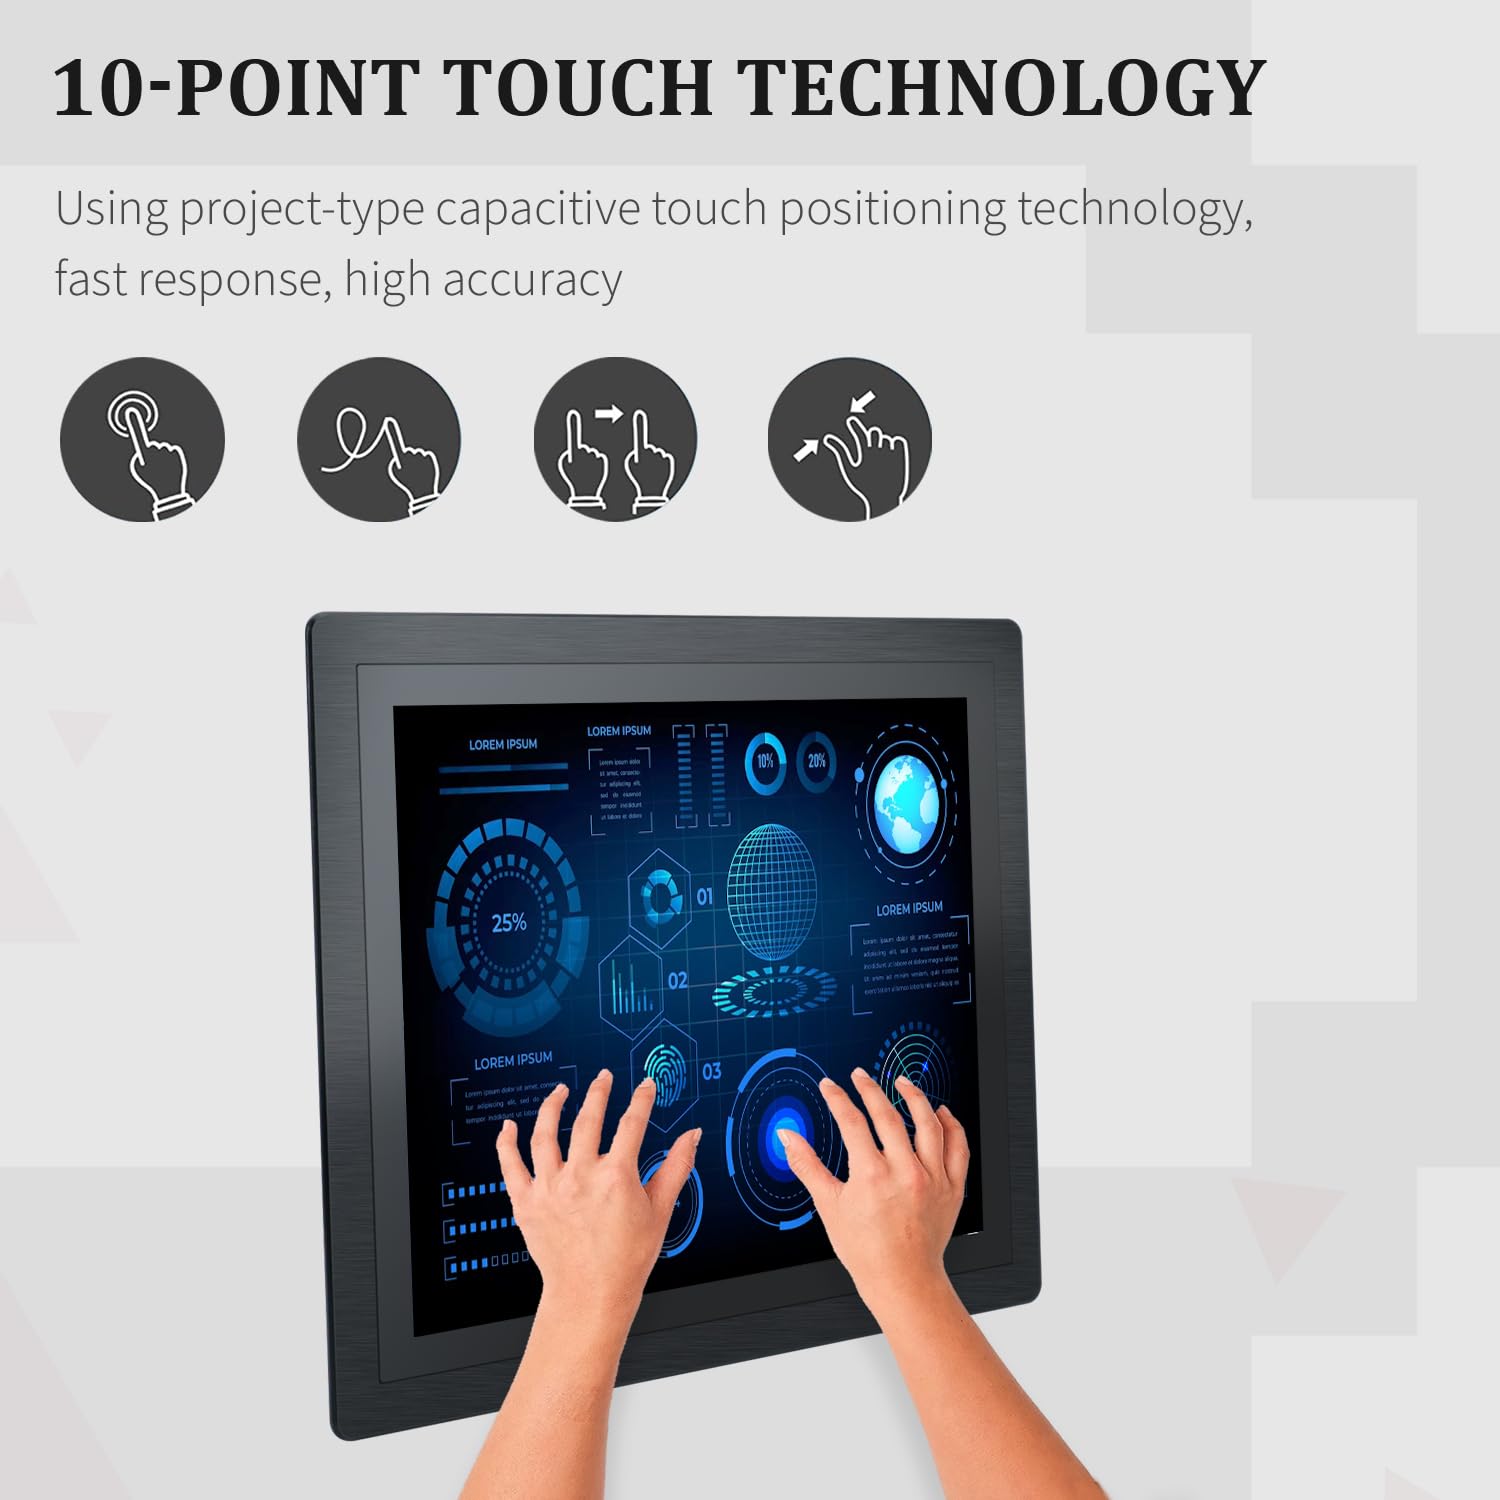 TouchWo 15 inch Industrial Embedded Touch Panel PC, Android All in One Mini PC with Open Frame Capacitive Touchscreen Monitor, RK3568 RAM 4G & ROM 32G Industrial PC Built-in Speakers